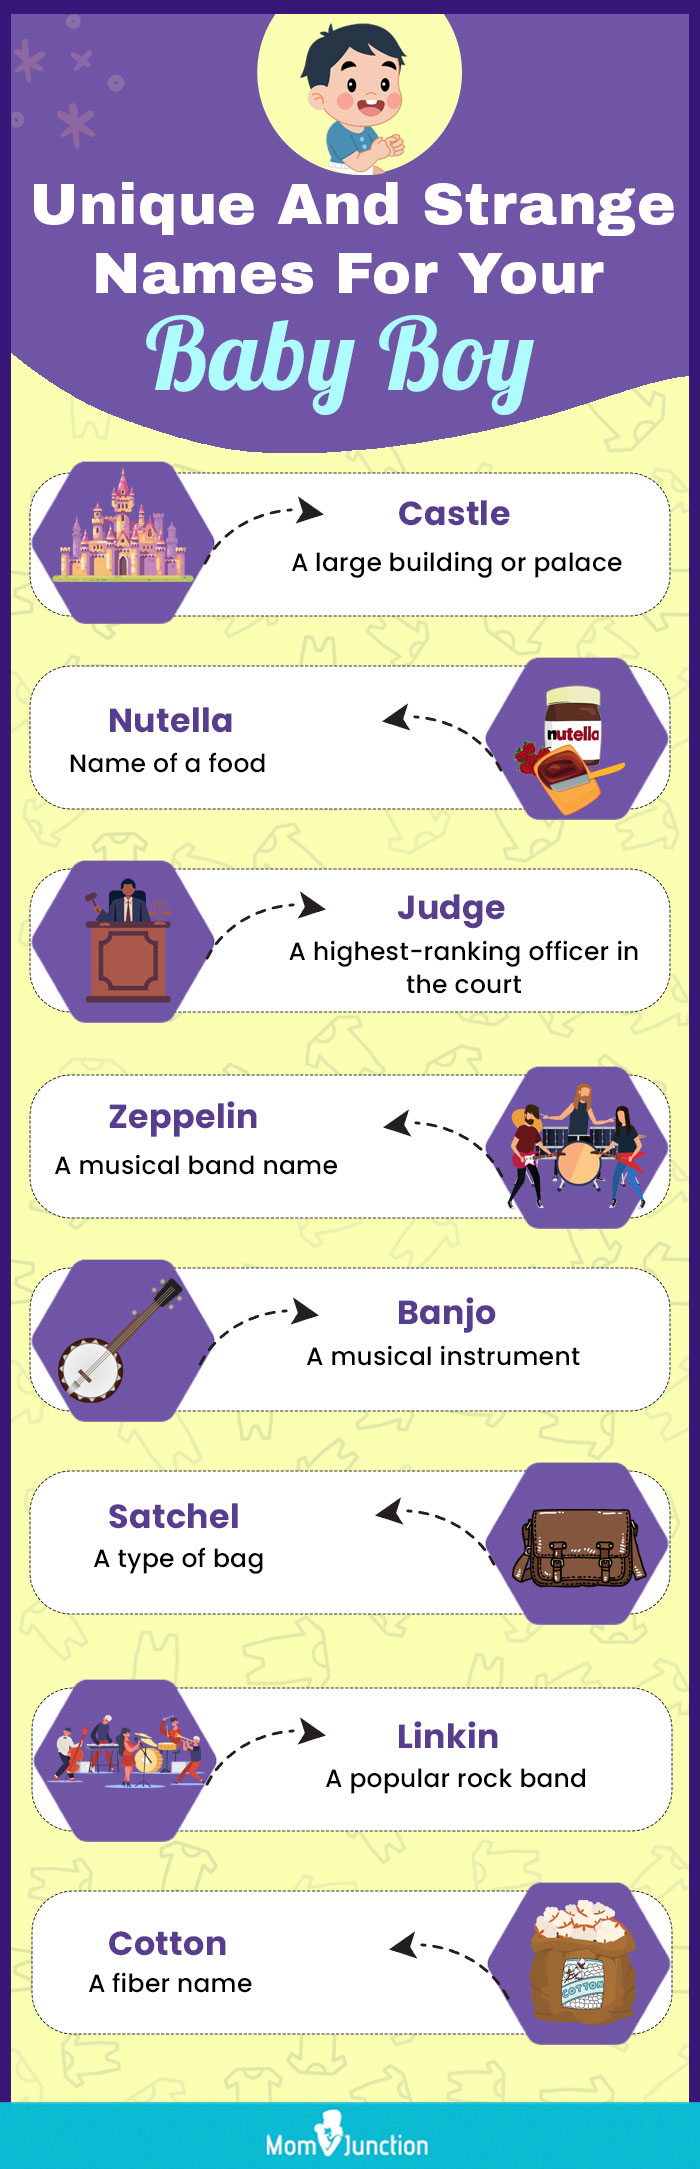 unique and strange names for your baby boy (infographic)